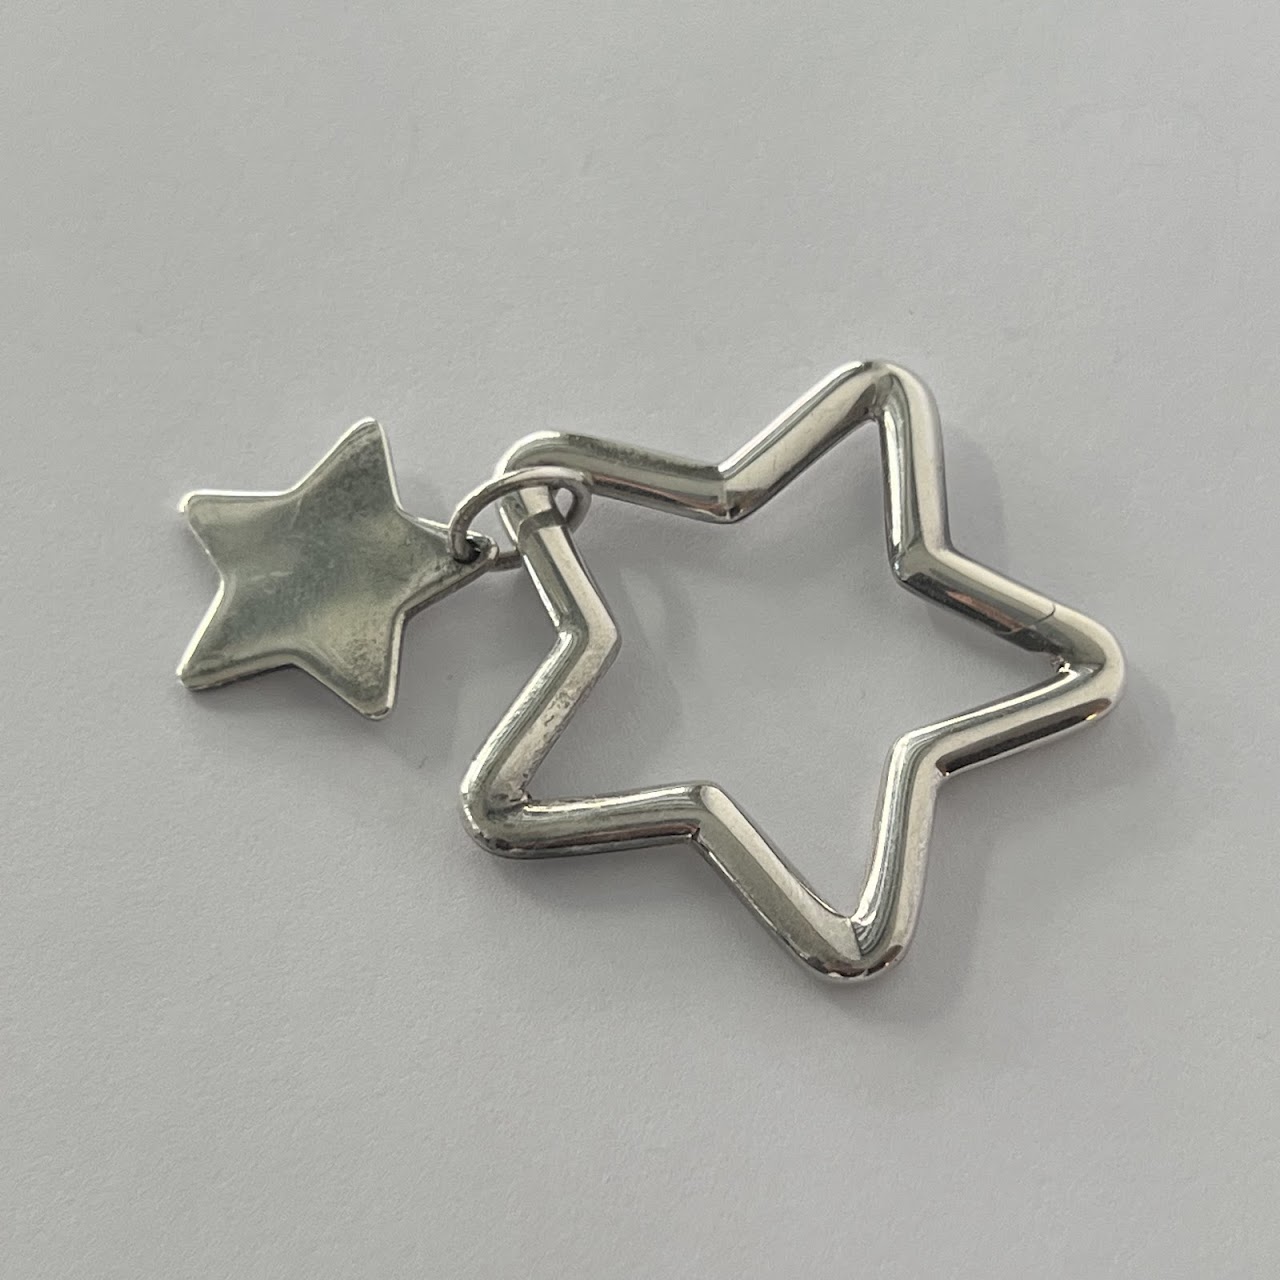 Tiffany & Co. Sterling Silver Double Star Keychain